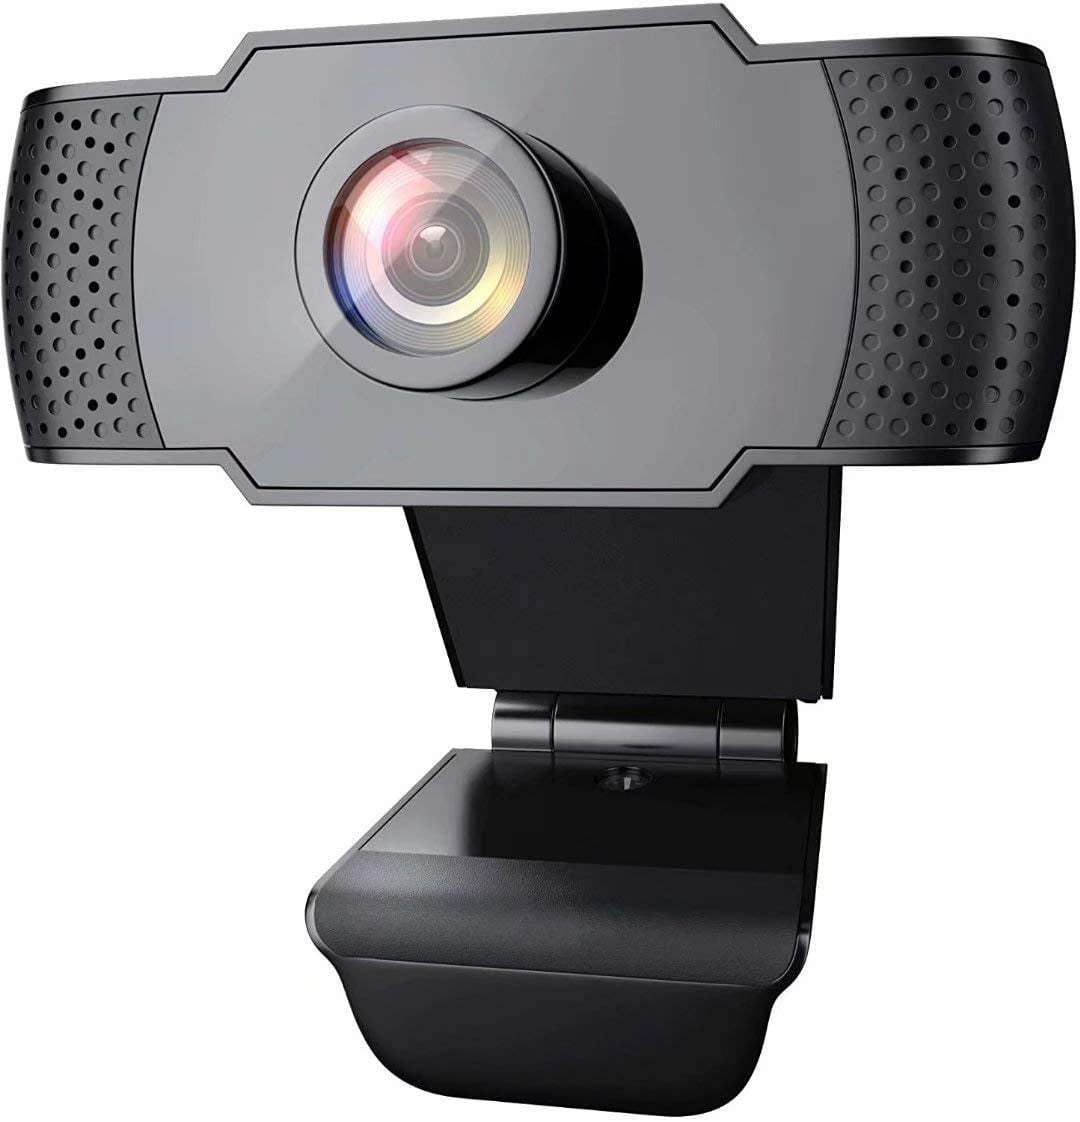 1080P Webcam with Microphone, USB 2.0 Laptop Computer Web Camera with Auto Light Correction, Plug and Play,,F86059 - Walmart.com